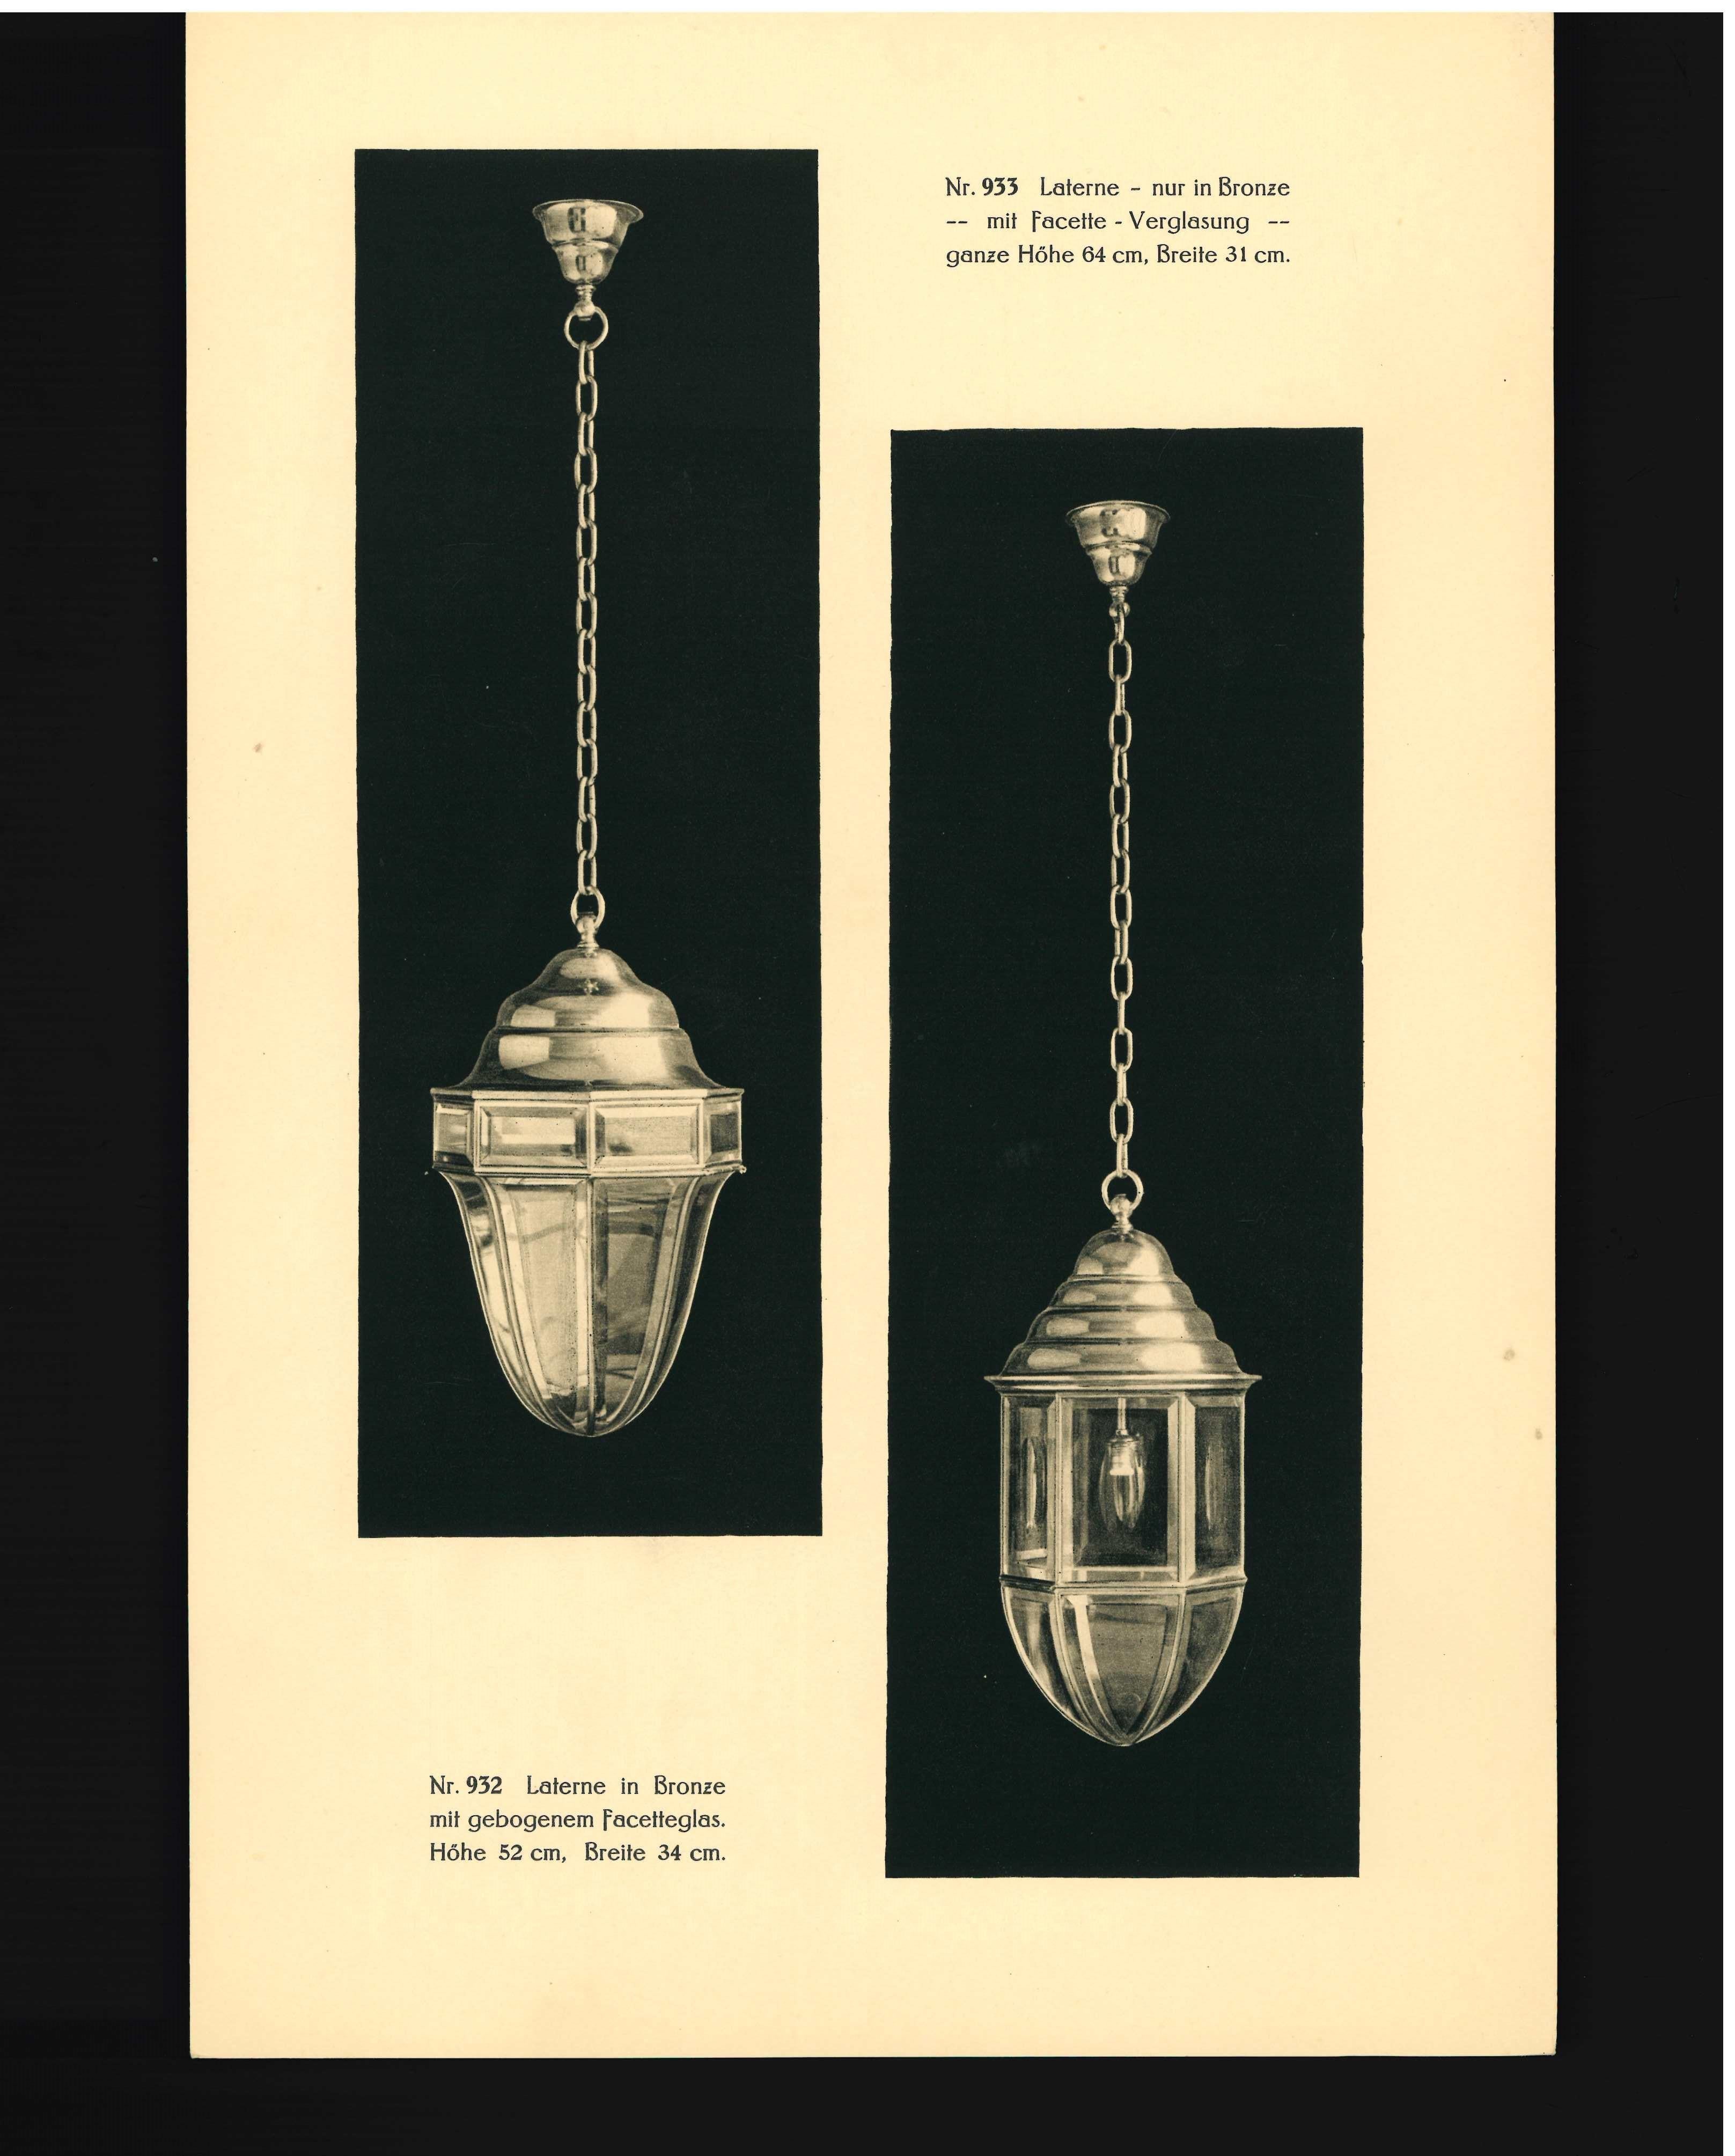 19th Century Reinhold Kirsch, German Early 20th Century Electric Lighting Catalogue (Book) For Sale